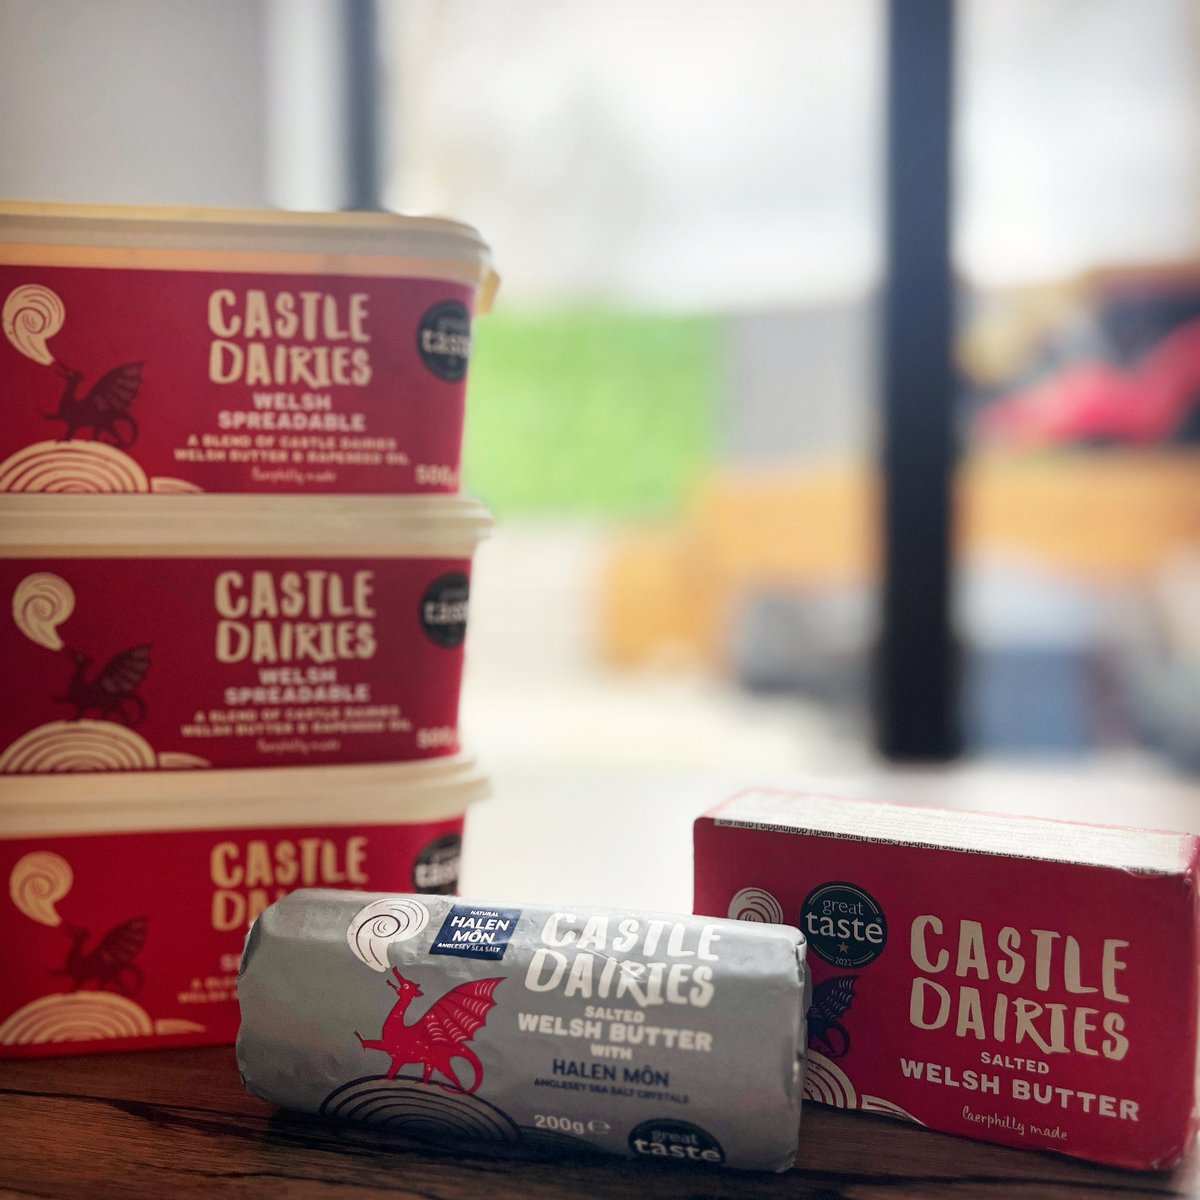 For all your baking and cooking needs, pick up a pack of Castle Dairies butter or spreadable🧈🧑‍🍳🥣 Available from supermarkets - Tesco, Lidl, Asda, Waitrose, Ocado, Sainsburys, M&S & Morrisons across Wales (and some England stores). #castledairies #butter #spreadable #wales